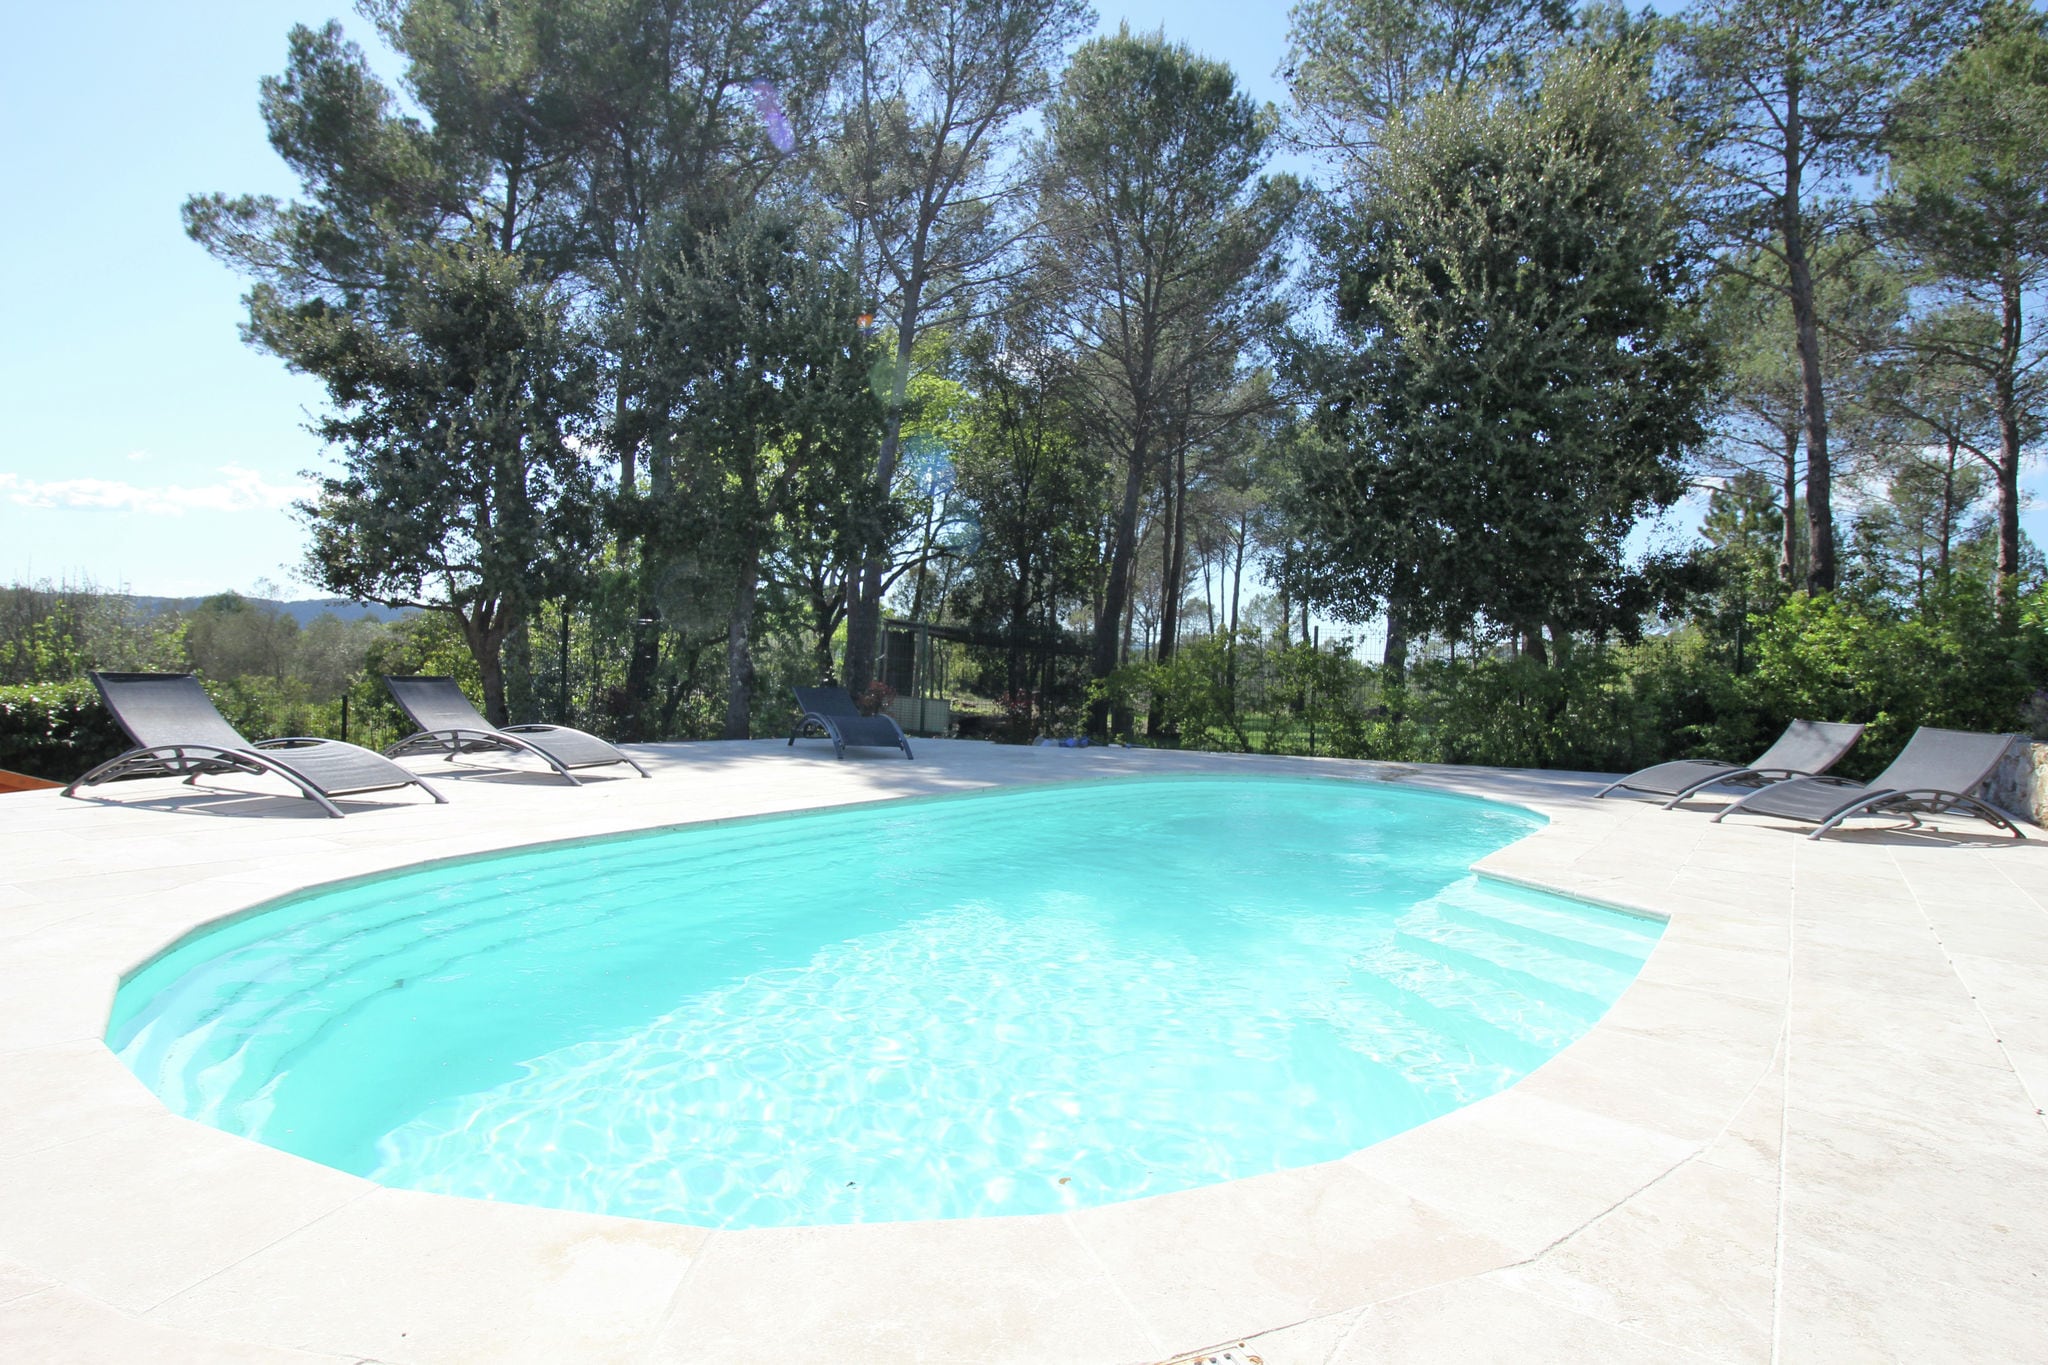 Lush villa in Bagnols en Foret with private pool